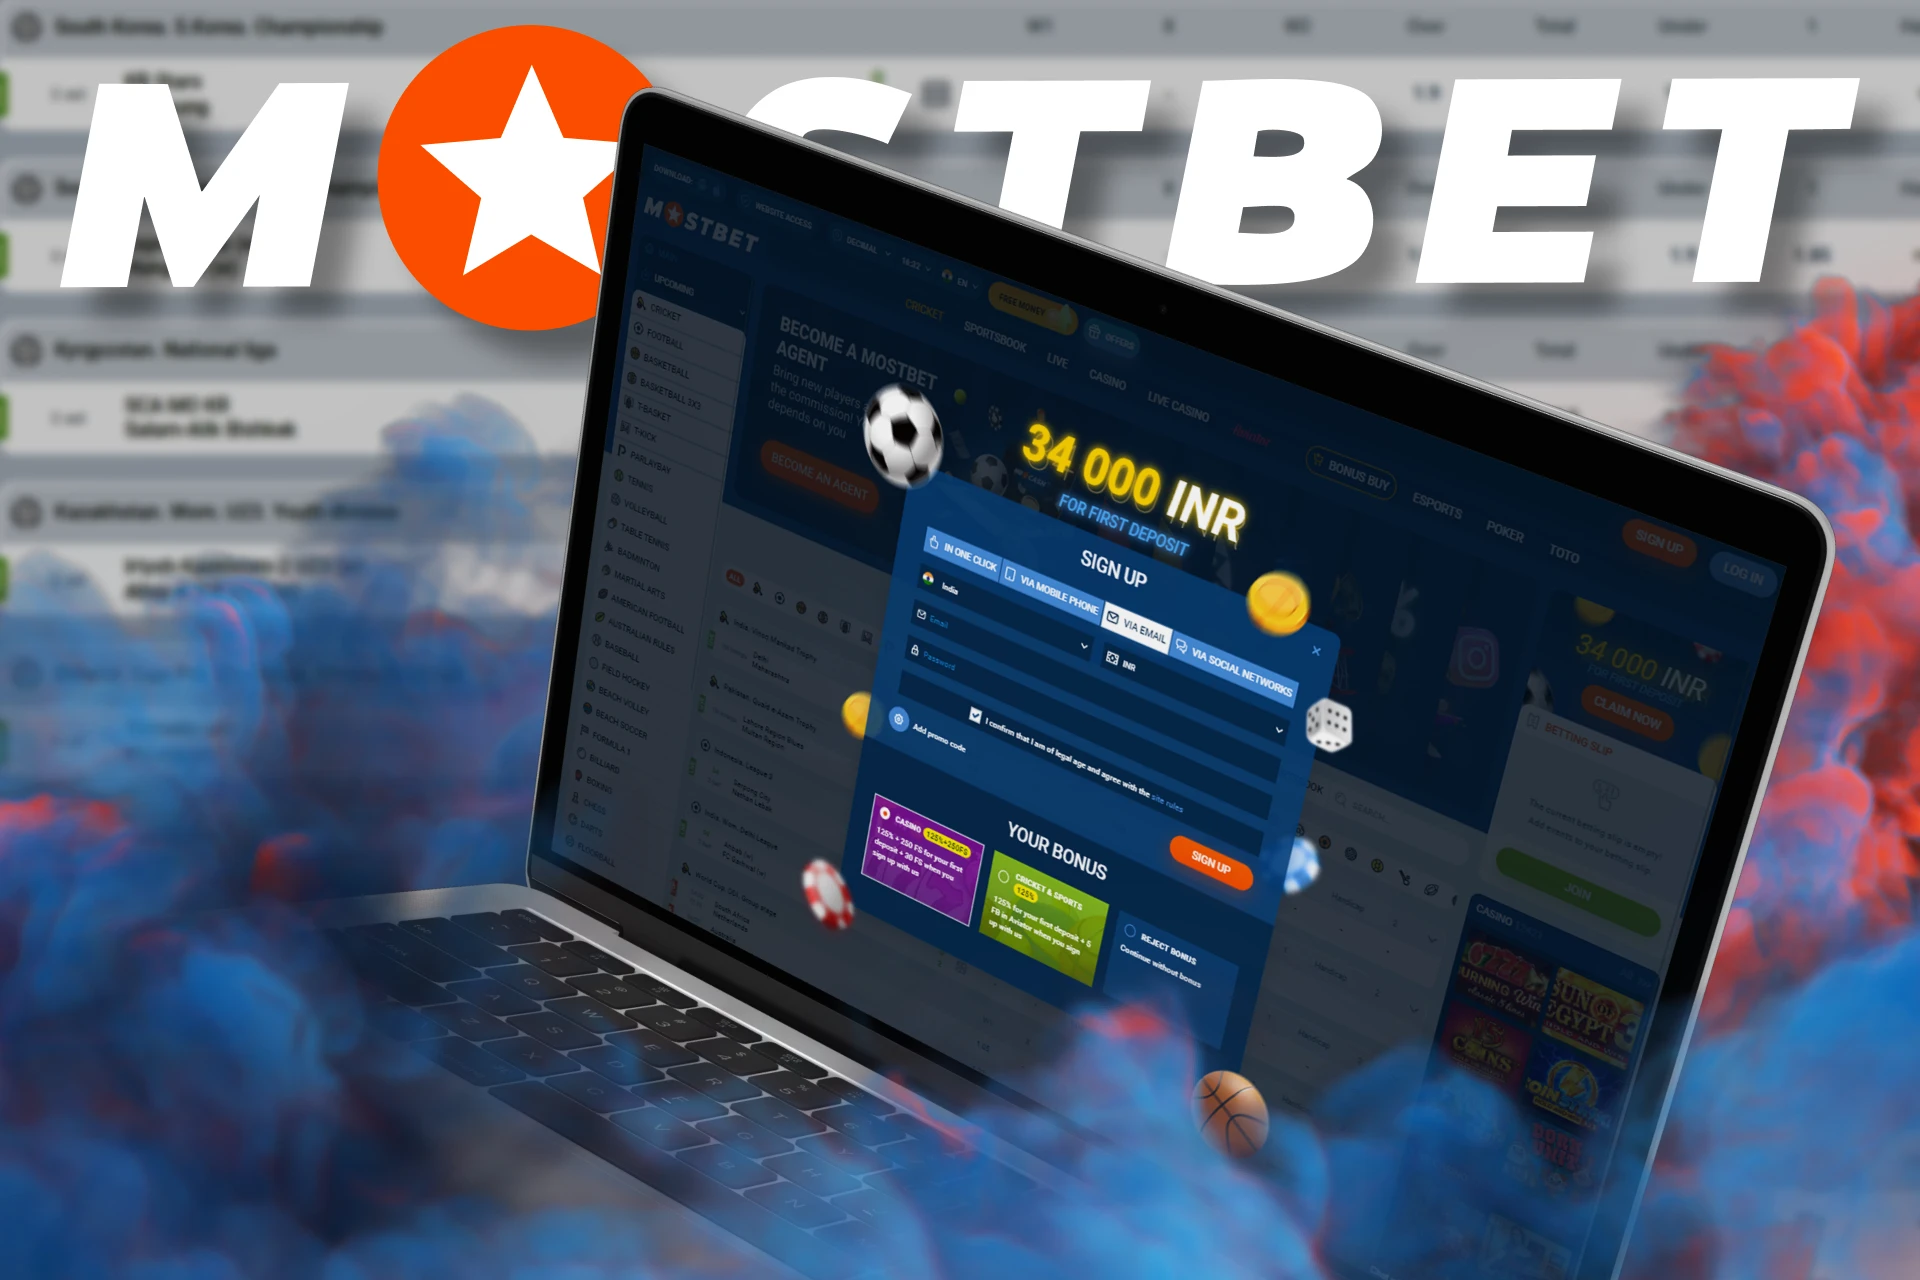 Select email registration to create a personal account with Mostbet.